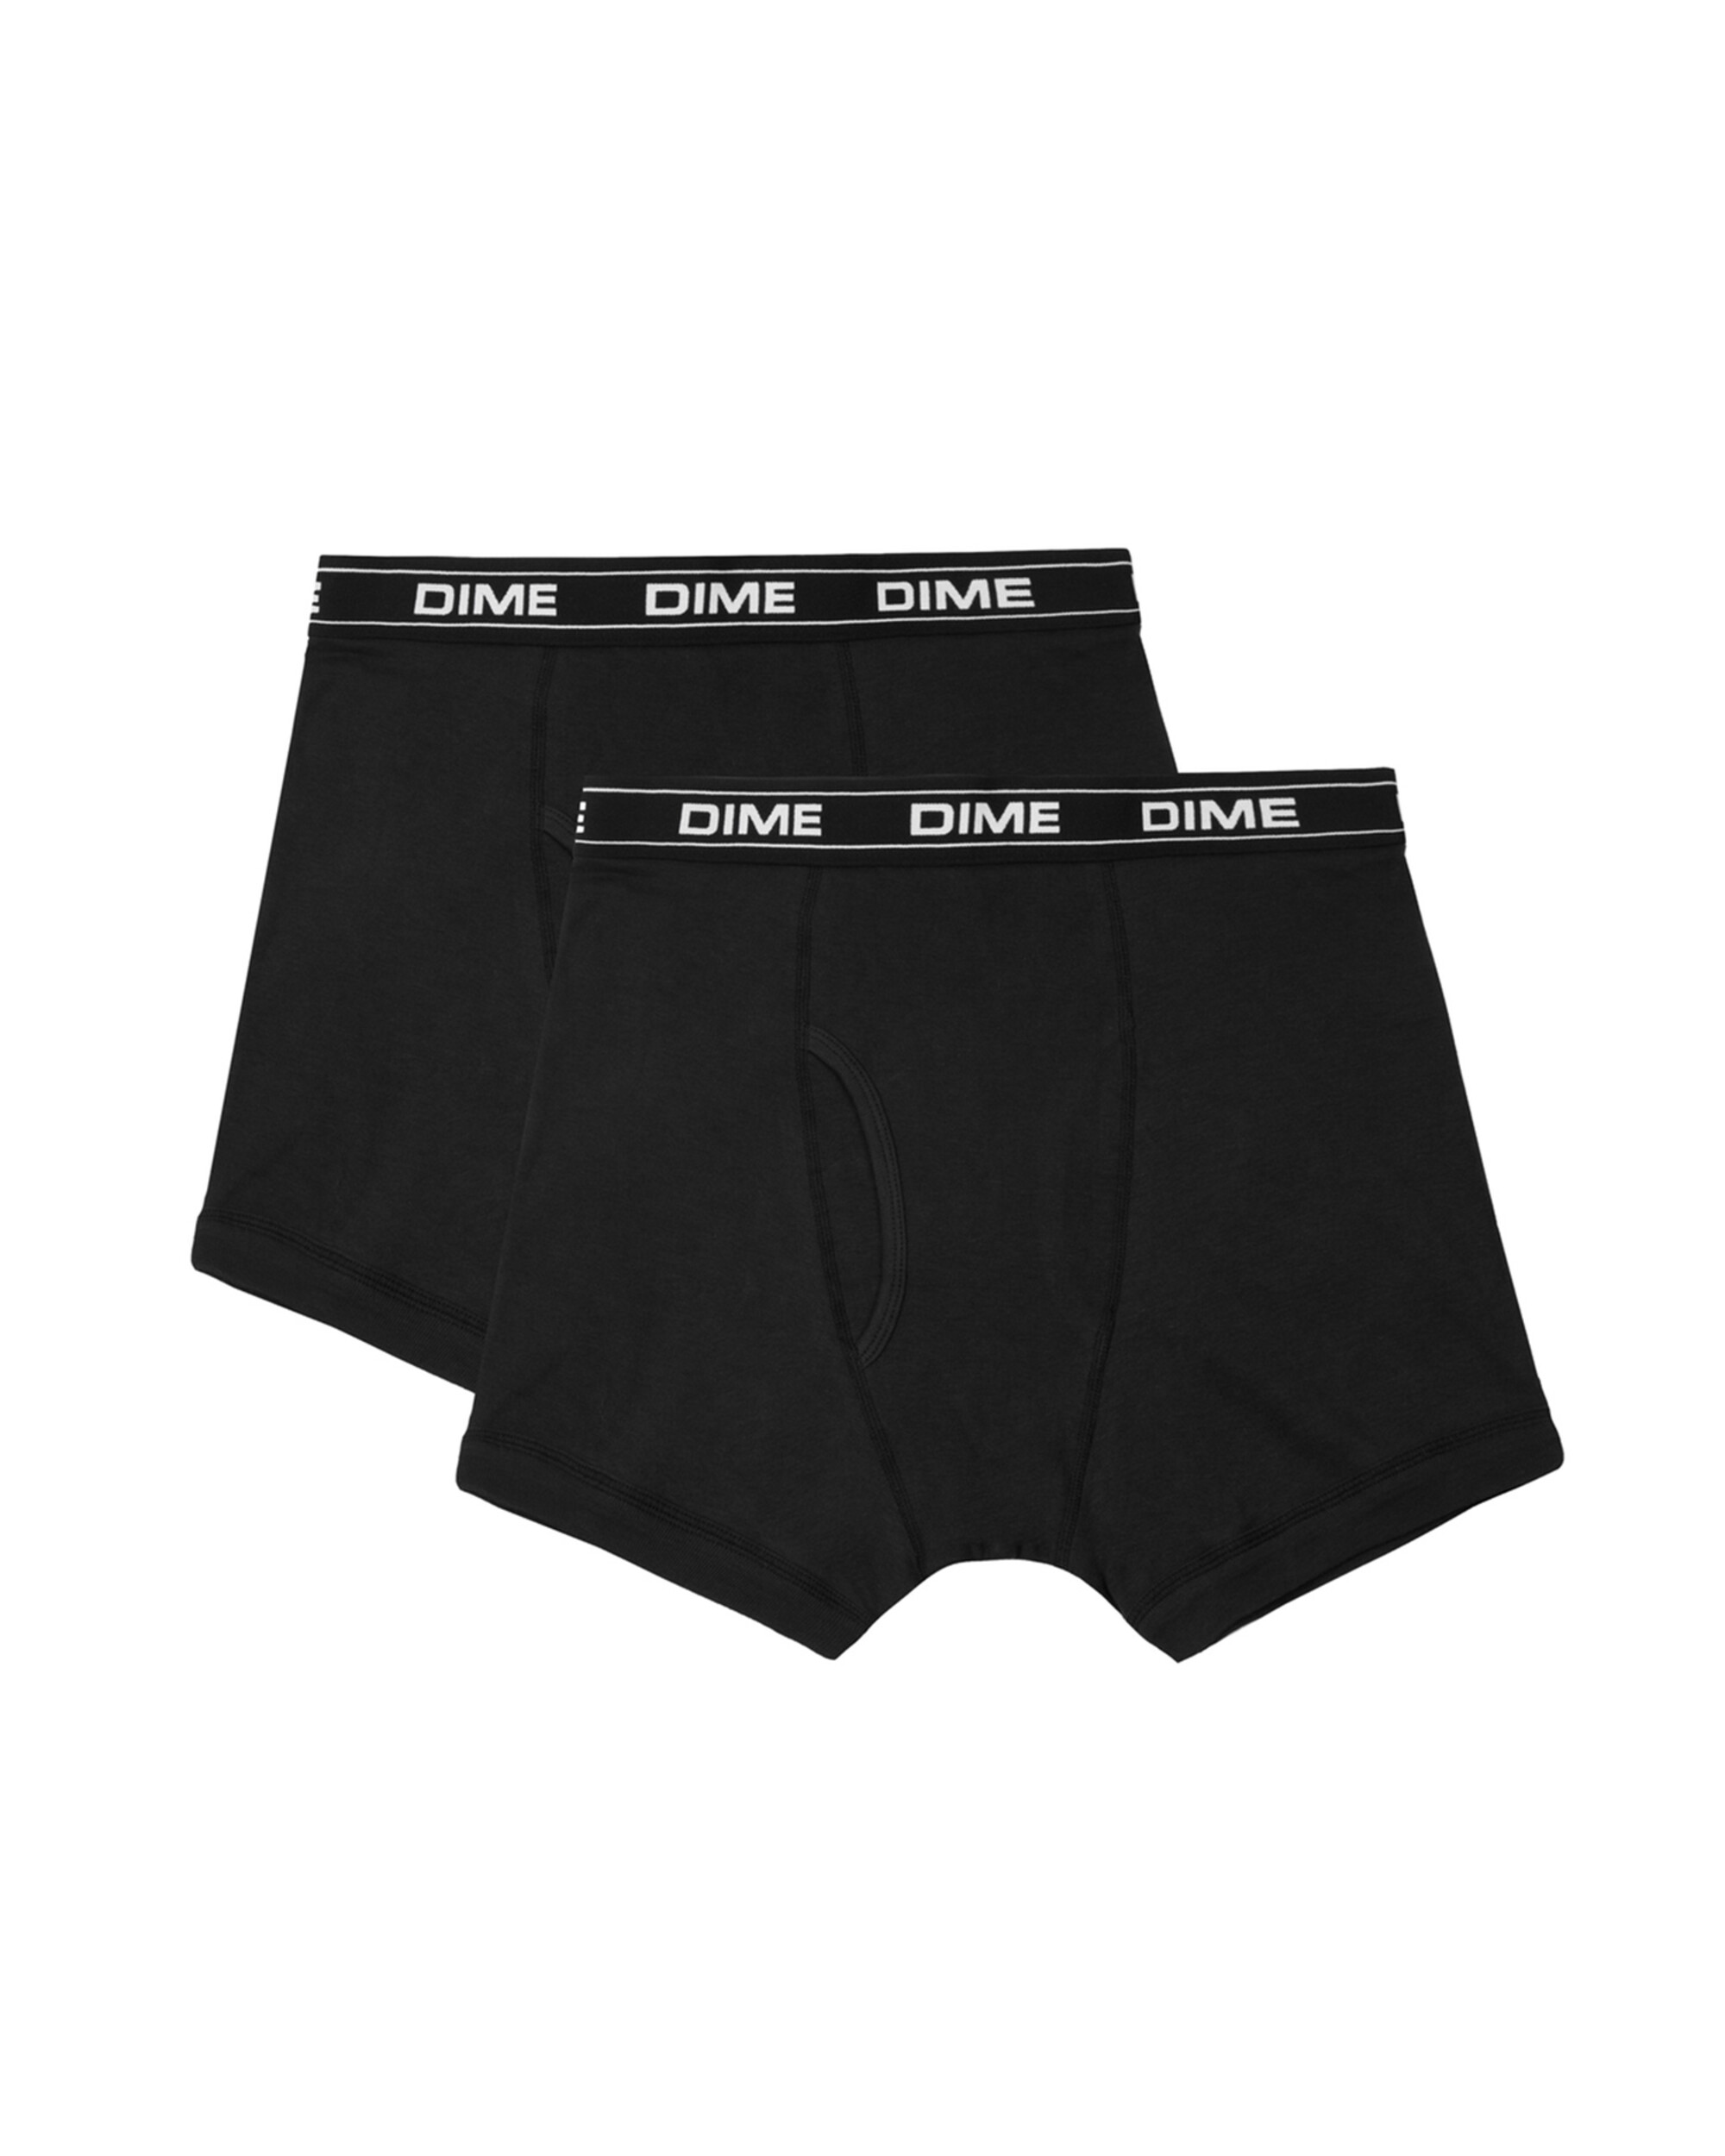 Dime Boxers Two Pack Black